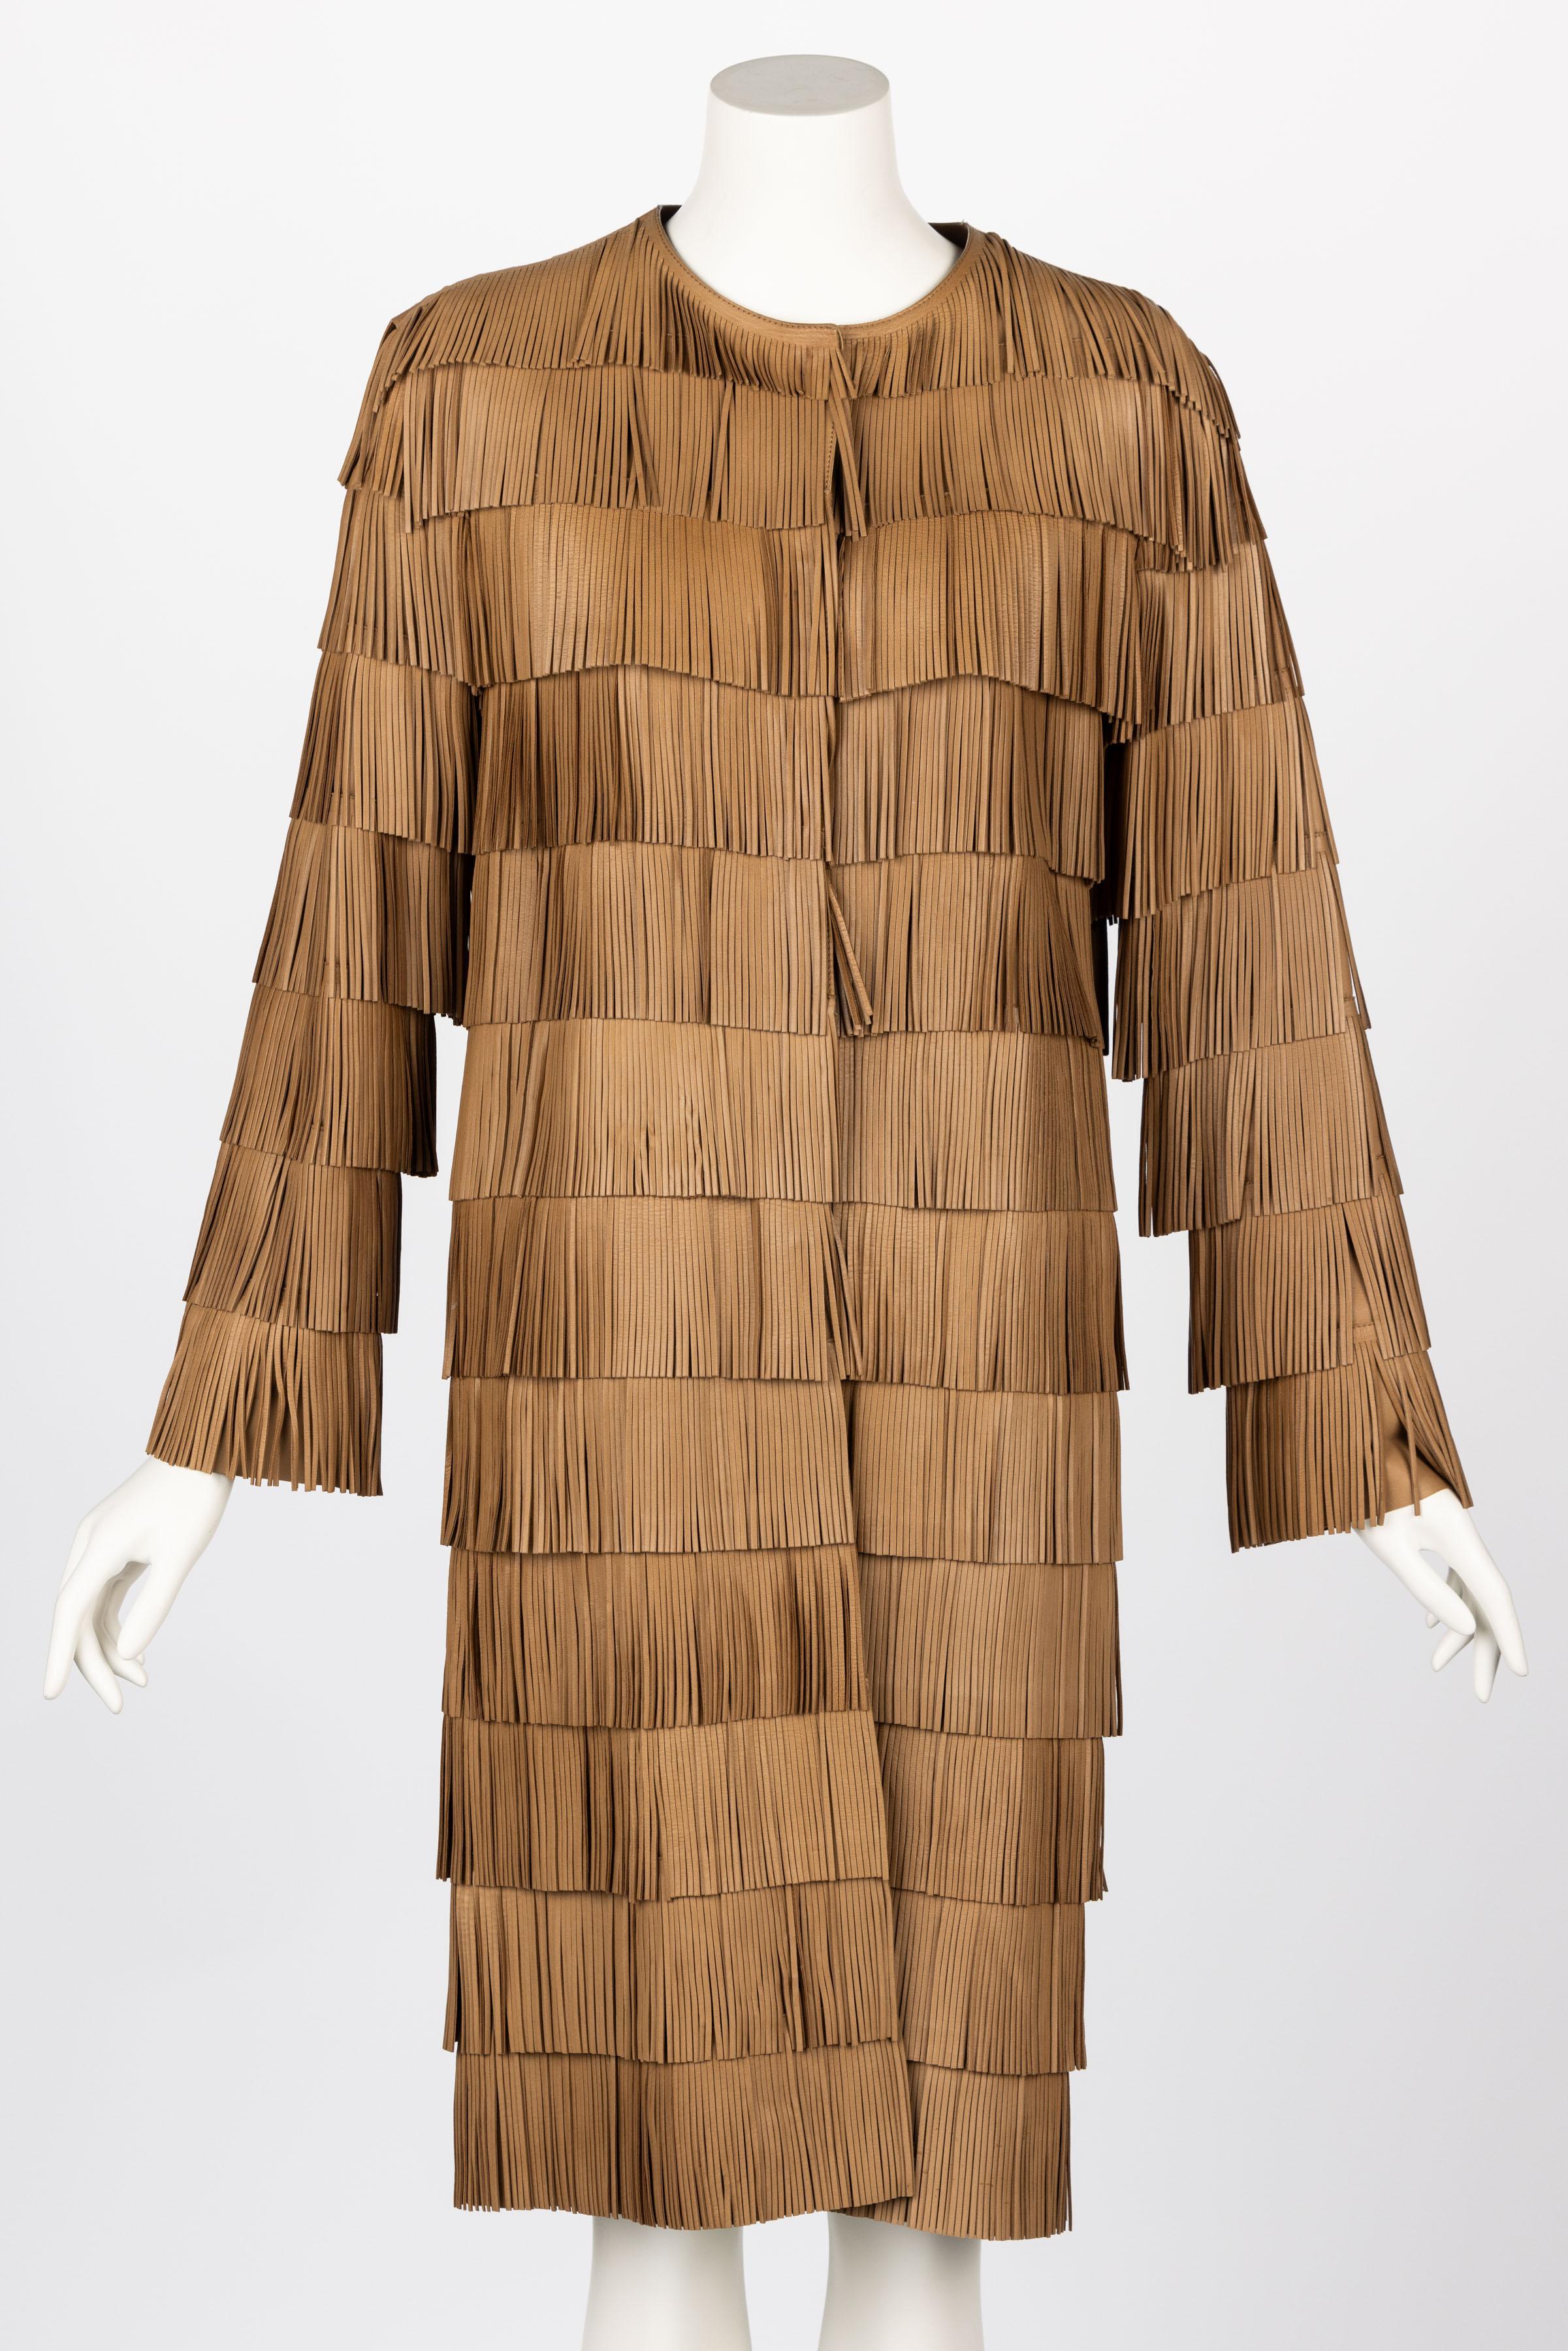 Prada Brown Leather Fringe Coat Runway Look #15 Spring 2007  In Excellent Condition For Sale In Boca Raton, FL